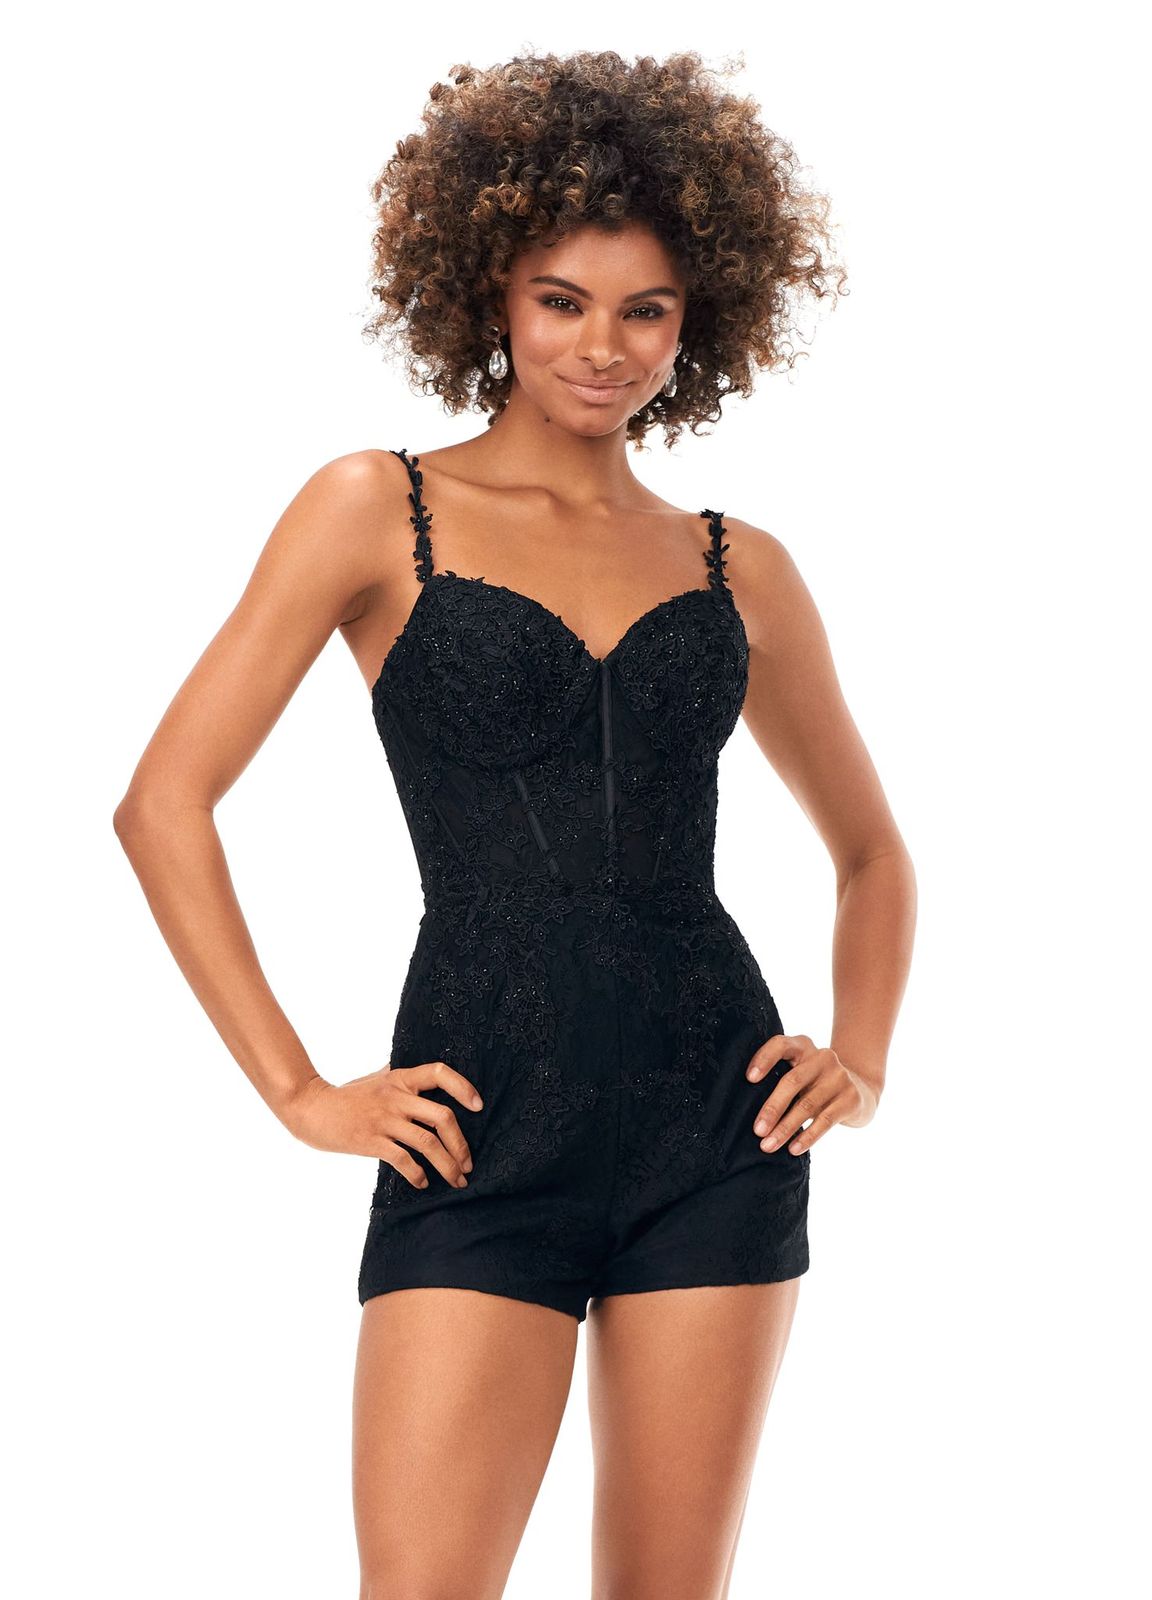 Ashley Lauren 11333 This spaghetti strap lace romper features lace applique thoroughout. The applique is adorned with heat set stones adding the perfect amount of sparkle. The detachable chiffon skirt completes the look. Spaghetti Straps Romper Detachable Chiffon Skirt COLORS: Black, Red